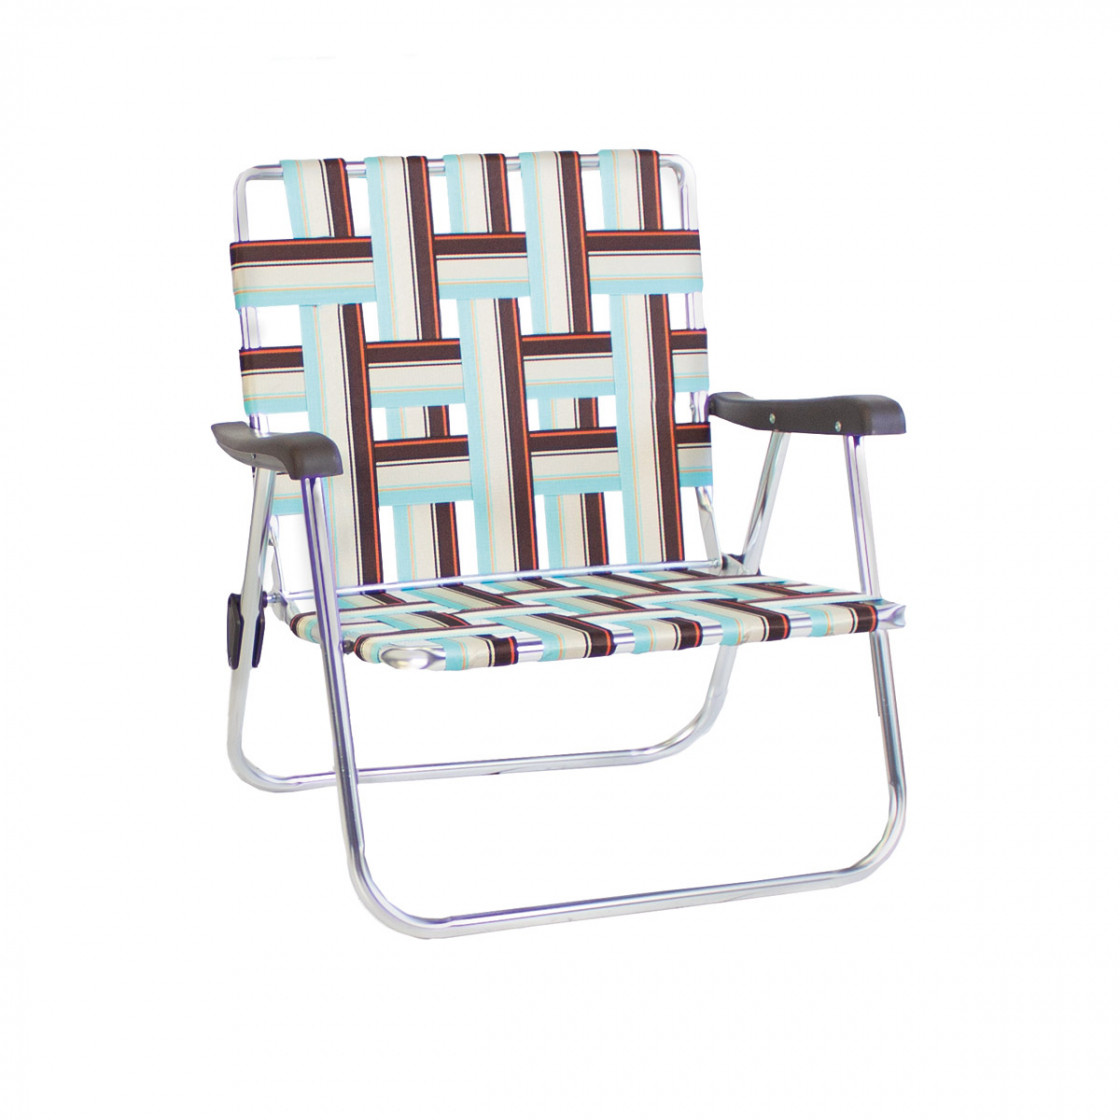 Fezz Backtrack Low Chair Teal/Brown